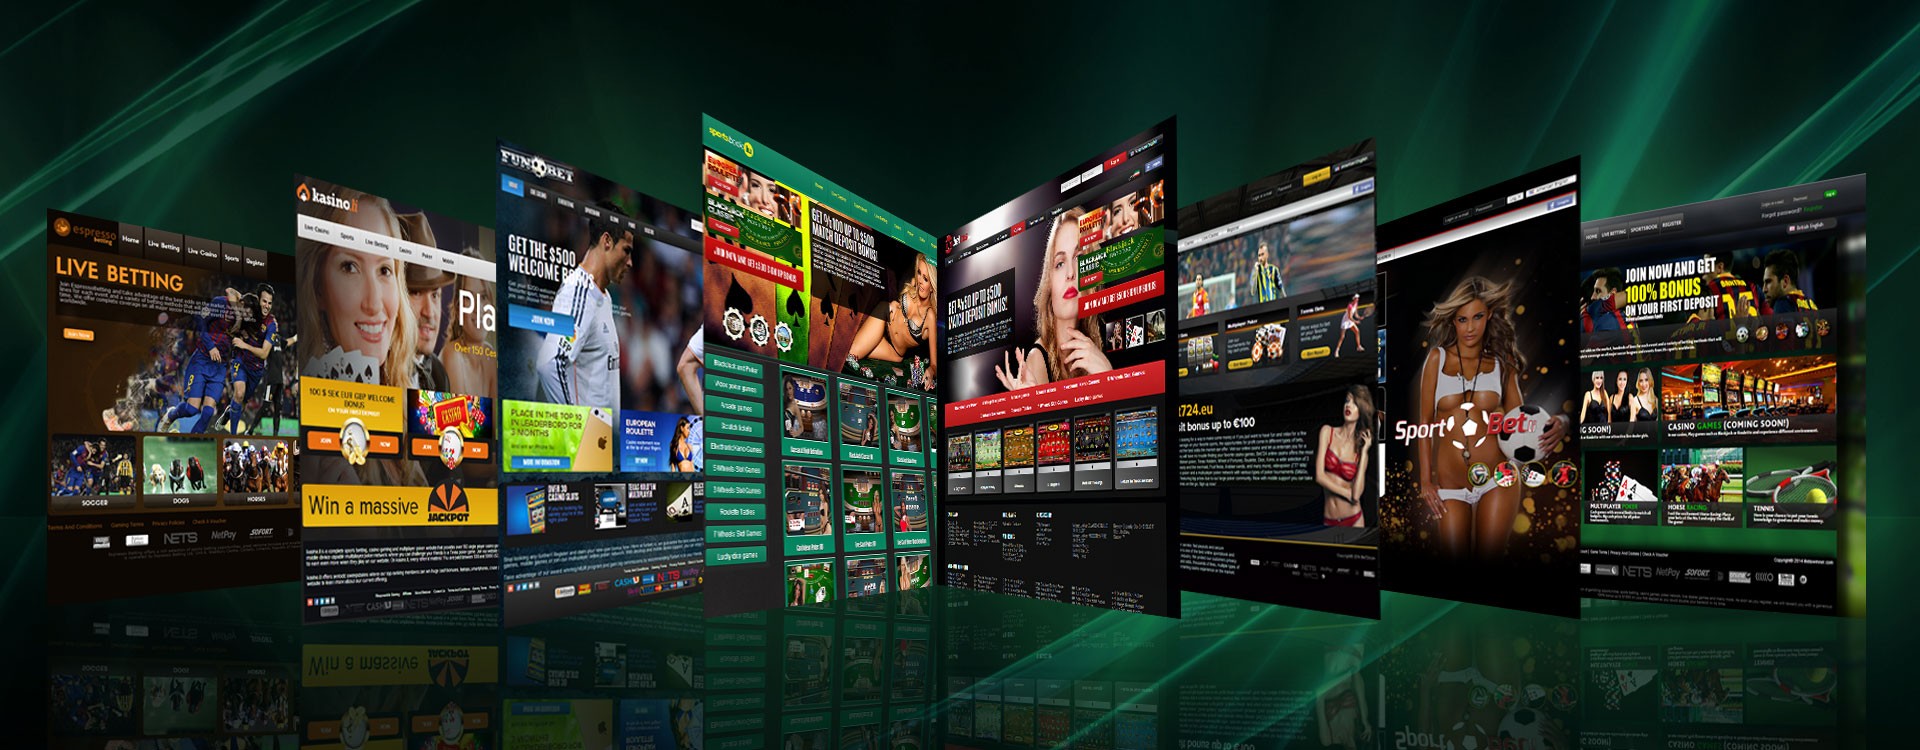 What Makes a Popular Online Sports Betting Site